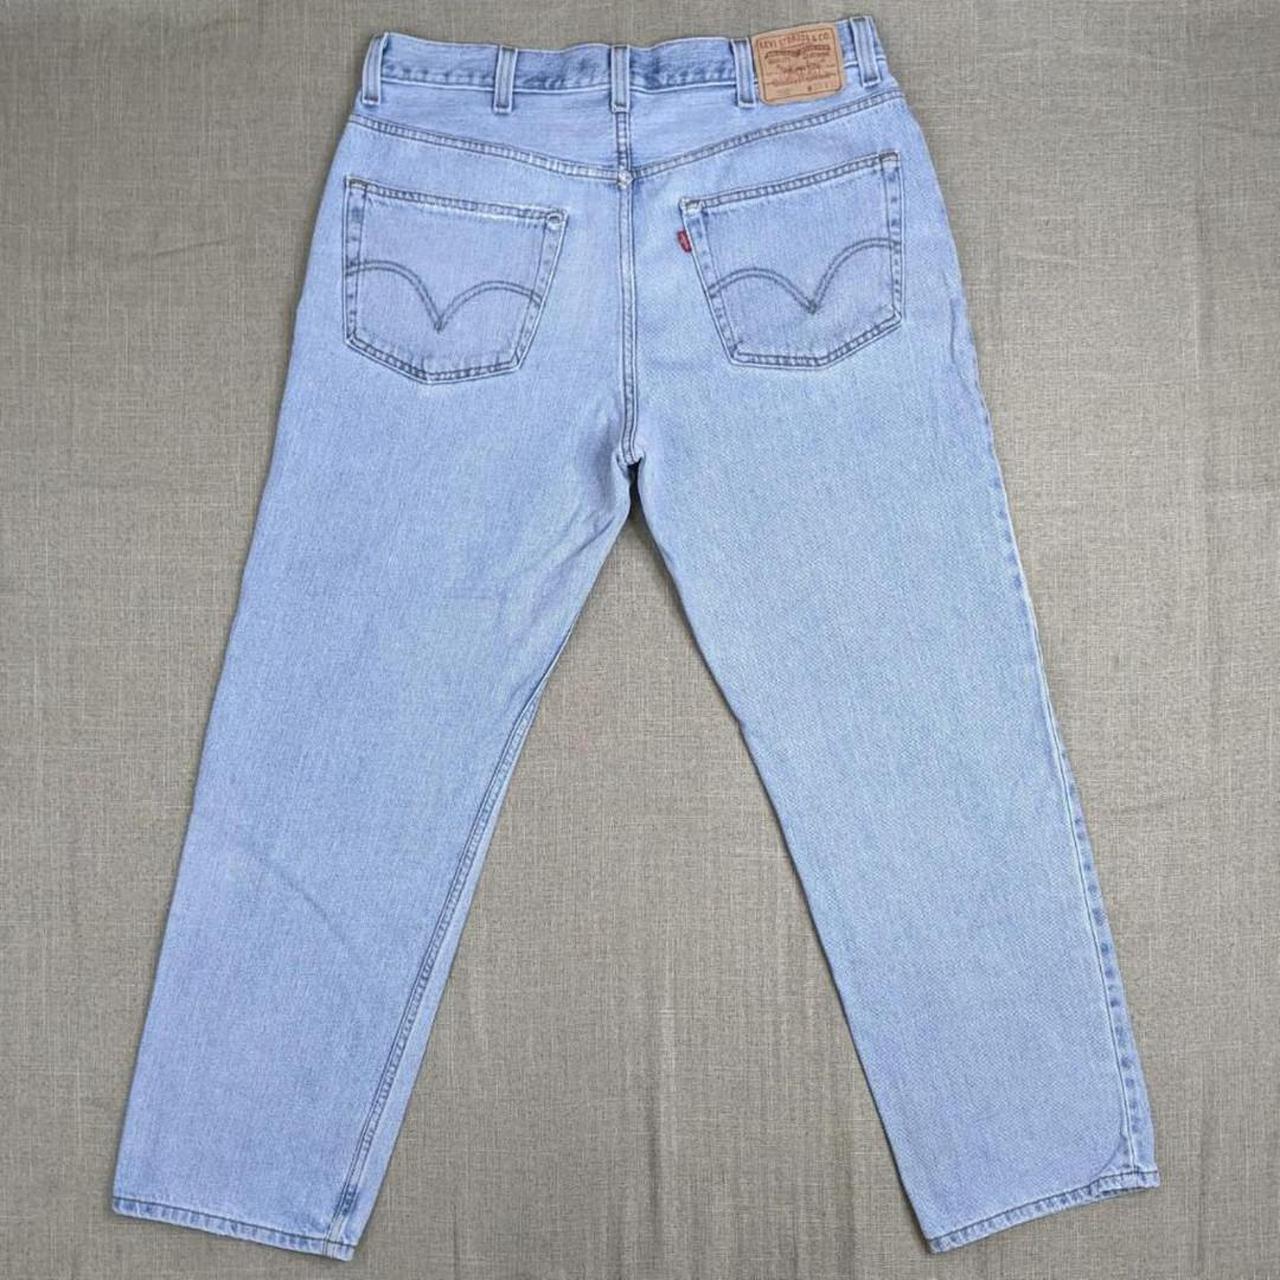 Product Image 2 - Vintage Levi's 550 jeans in